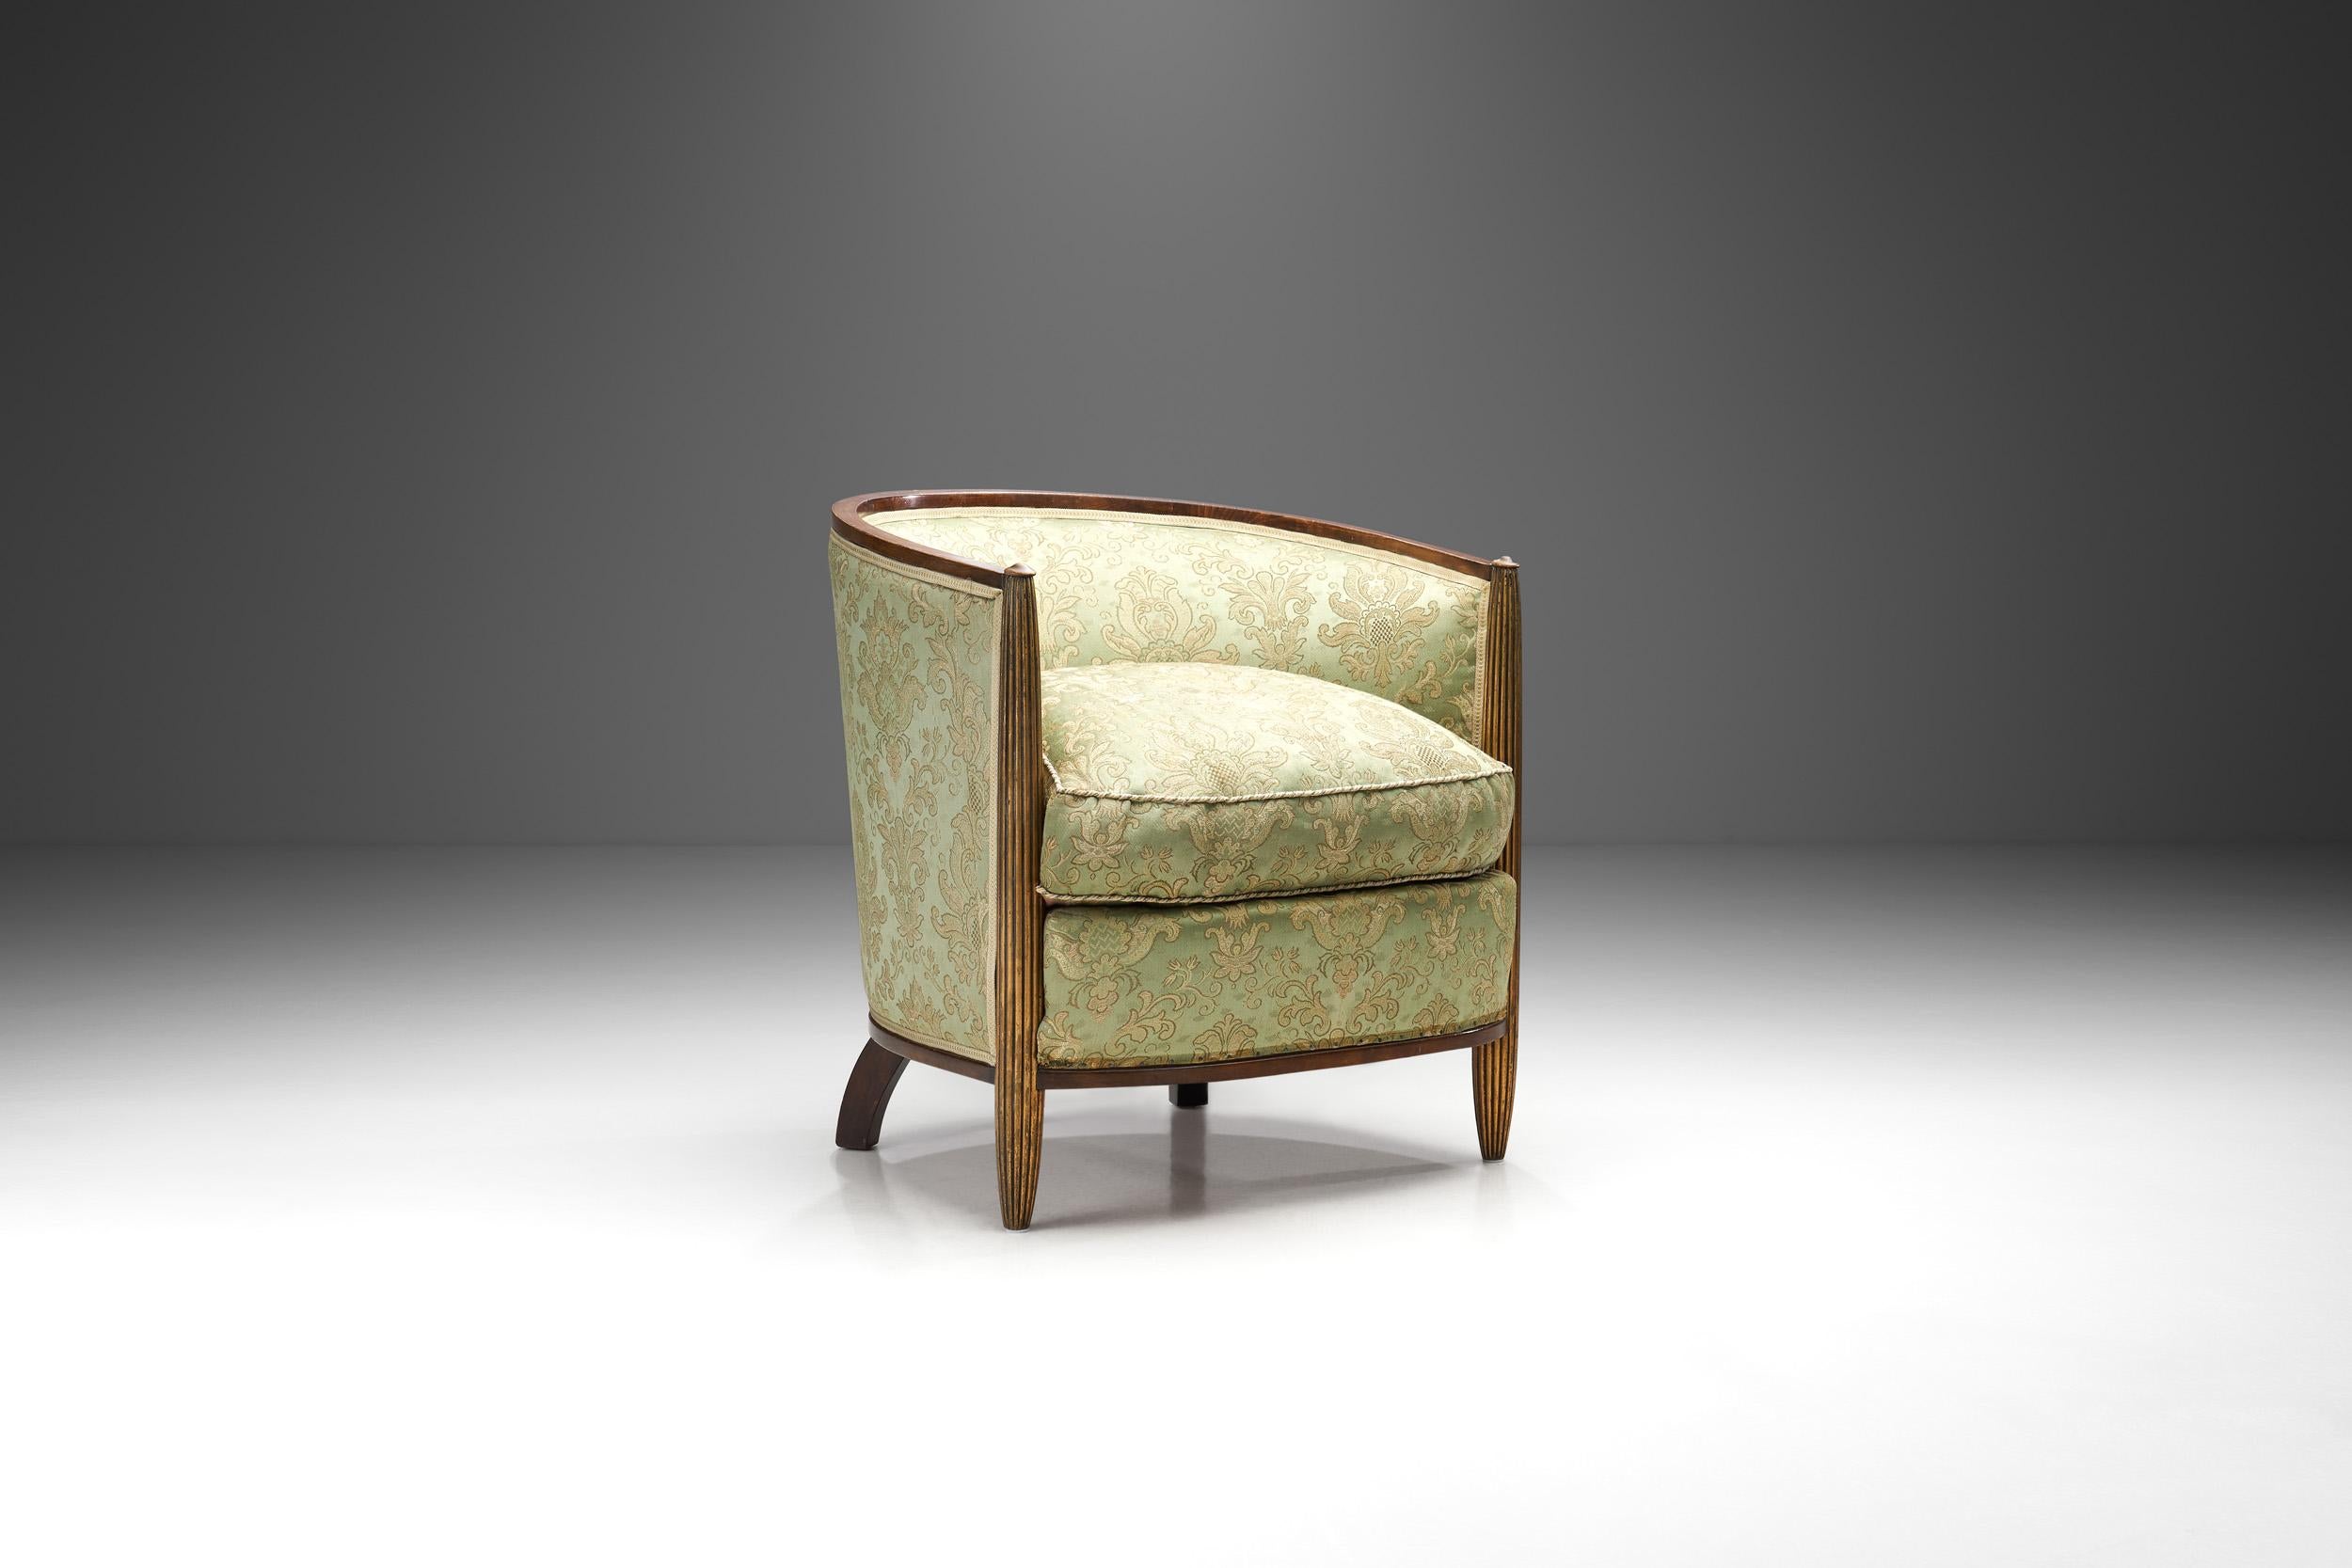 This armchair recalls a beautiful era in French design history. The early 20th century saw the rise of Art Nouveau in much of Europe, first and foremost, in France. French furniture makers embraced this style, and in the years between the World